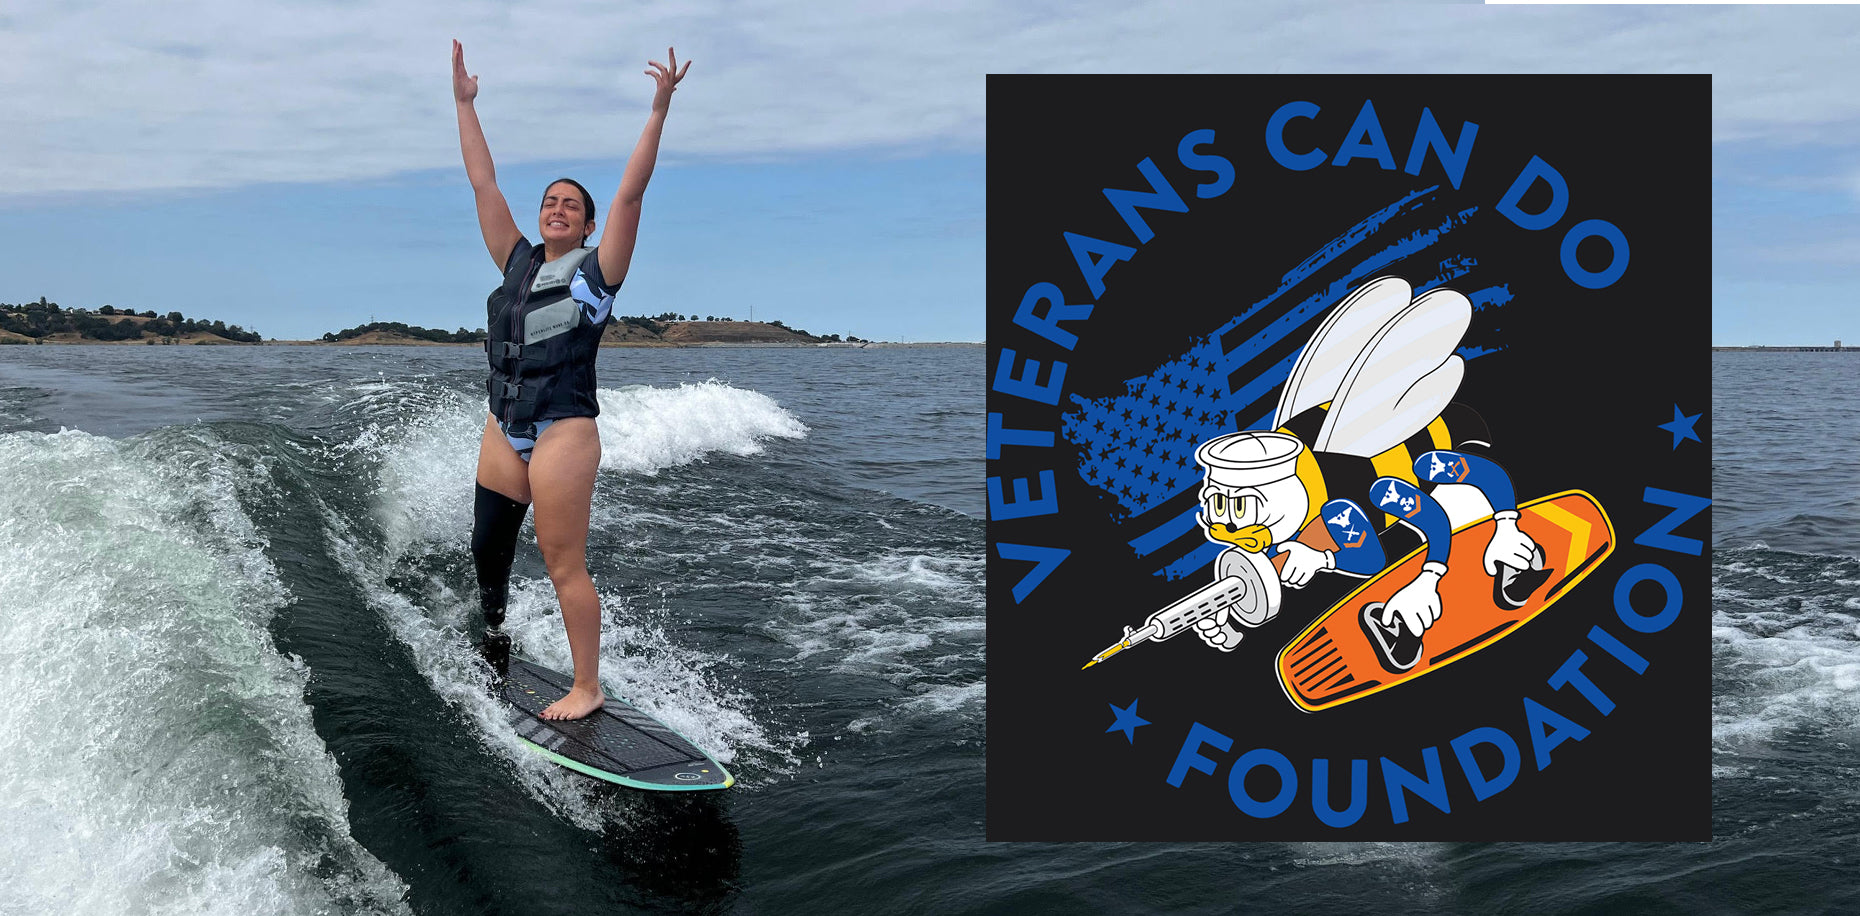 The "Veterans Can Do" Foundation